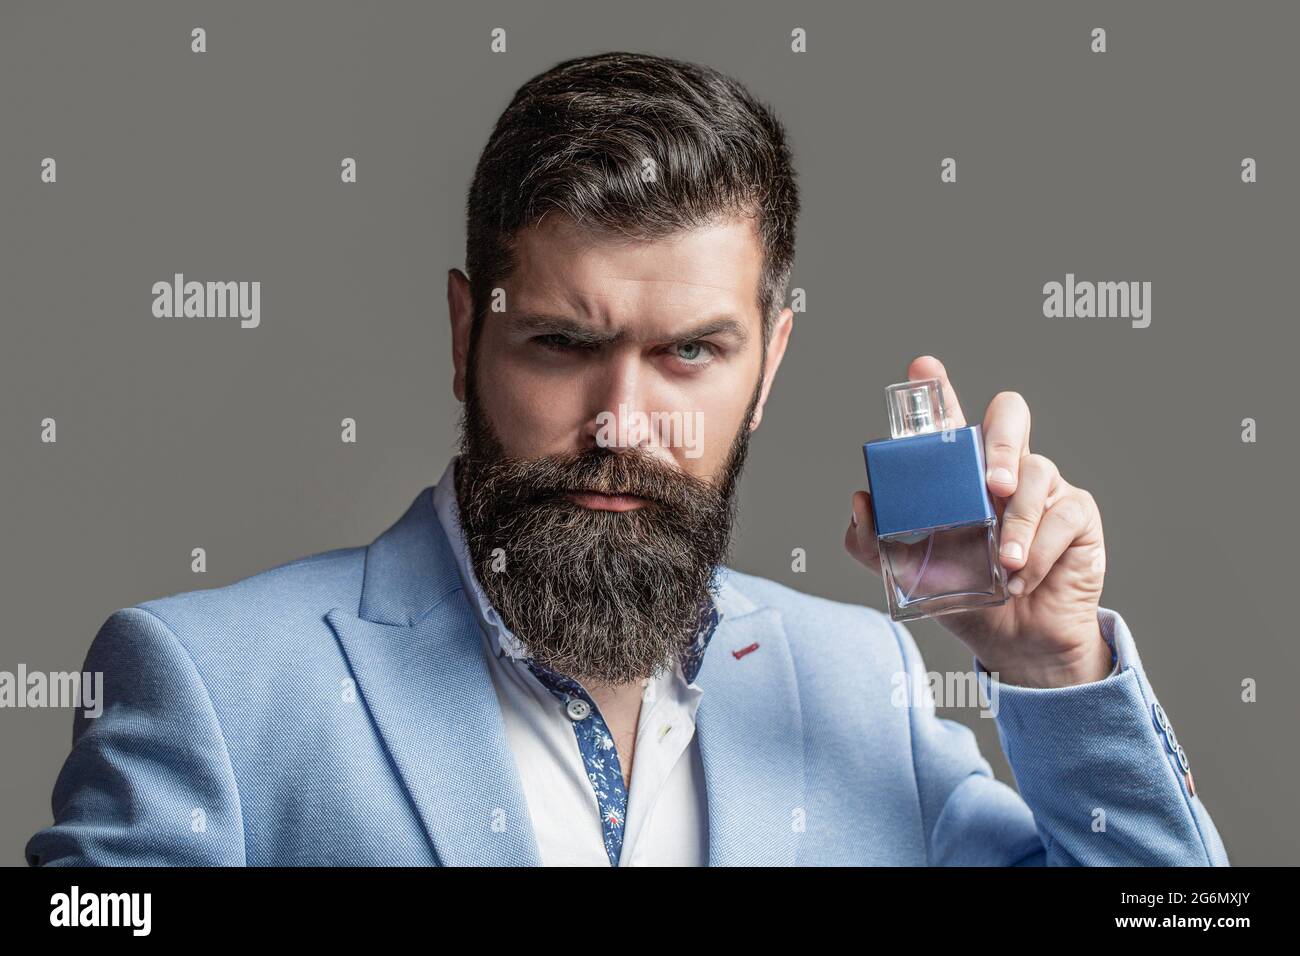 https://c8.alamy.com/comp/2G6MXJY/masculine-perfumery-bearded-man-in-a-suit-male-holding-up-bottle-of-perfume-man-perfume-fragrance-perfume-or-cologne-bottle-perfumery-cosmetics-2G6MXJY.jpg